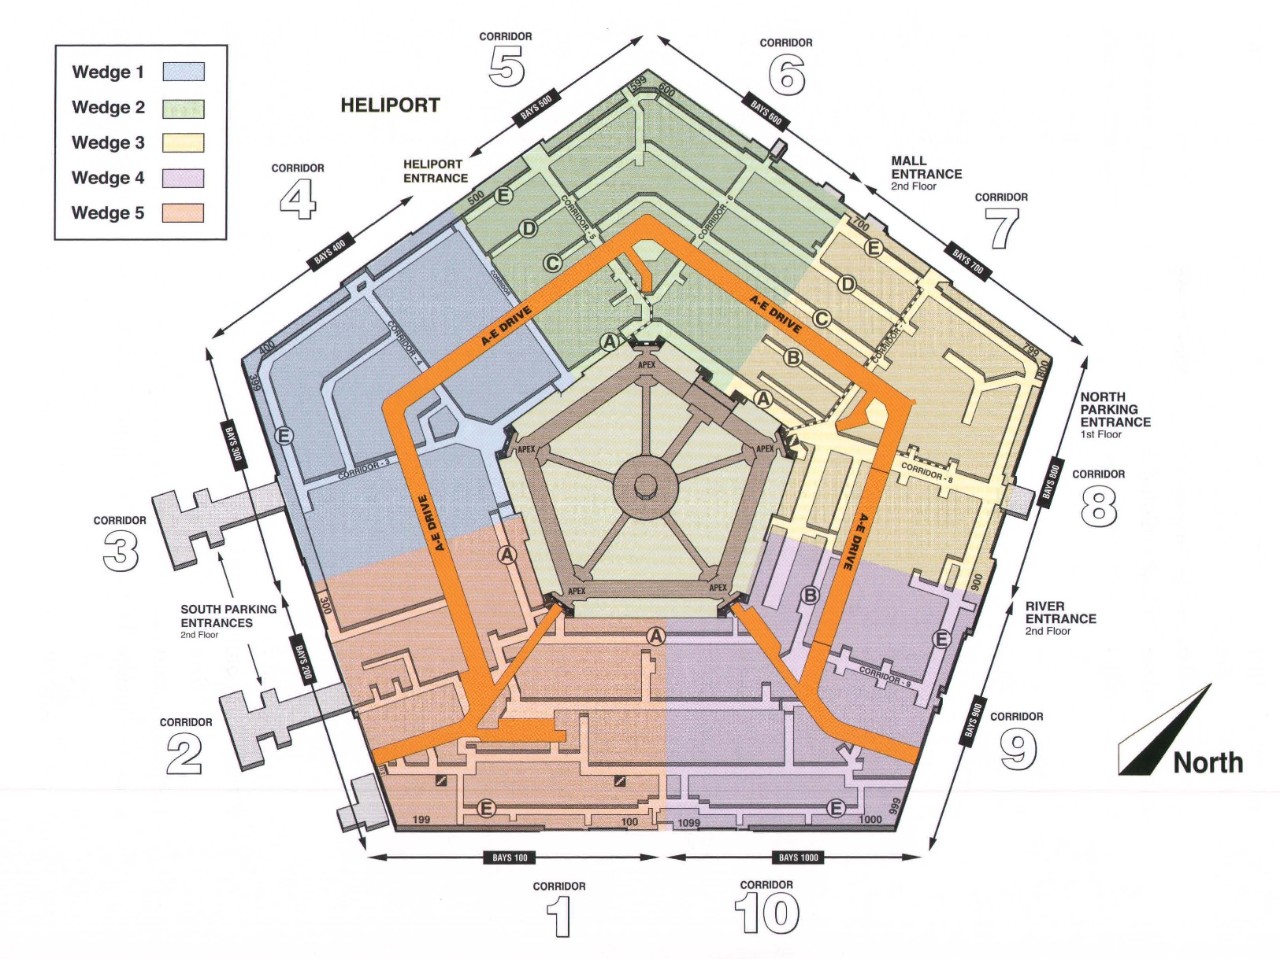 Layout of the First Floor of the Pentagon